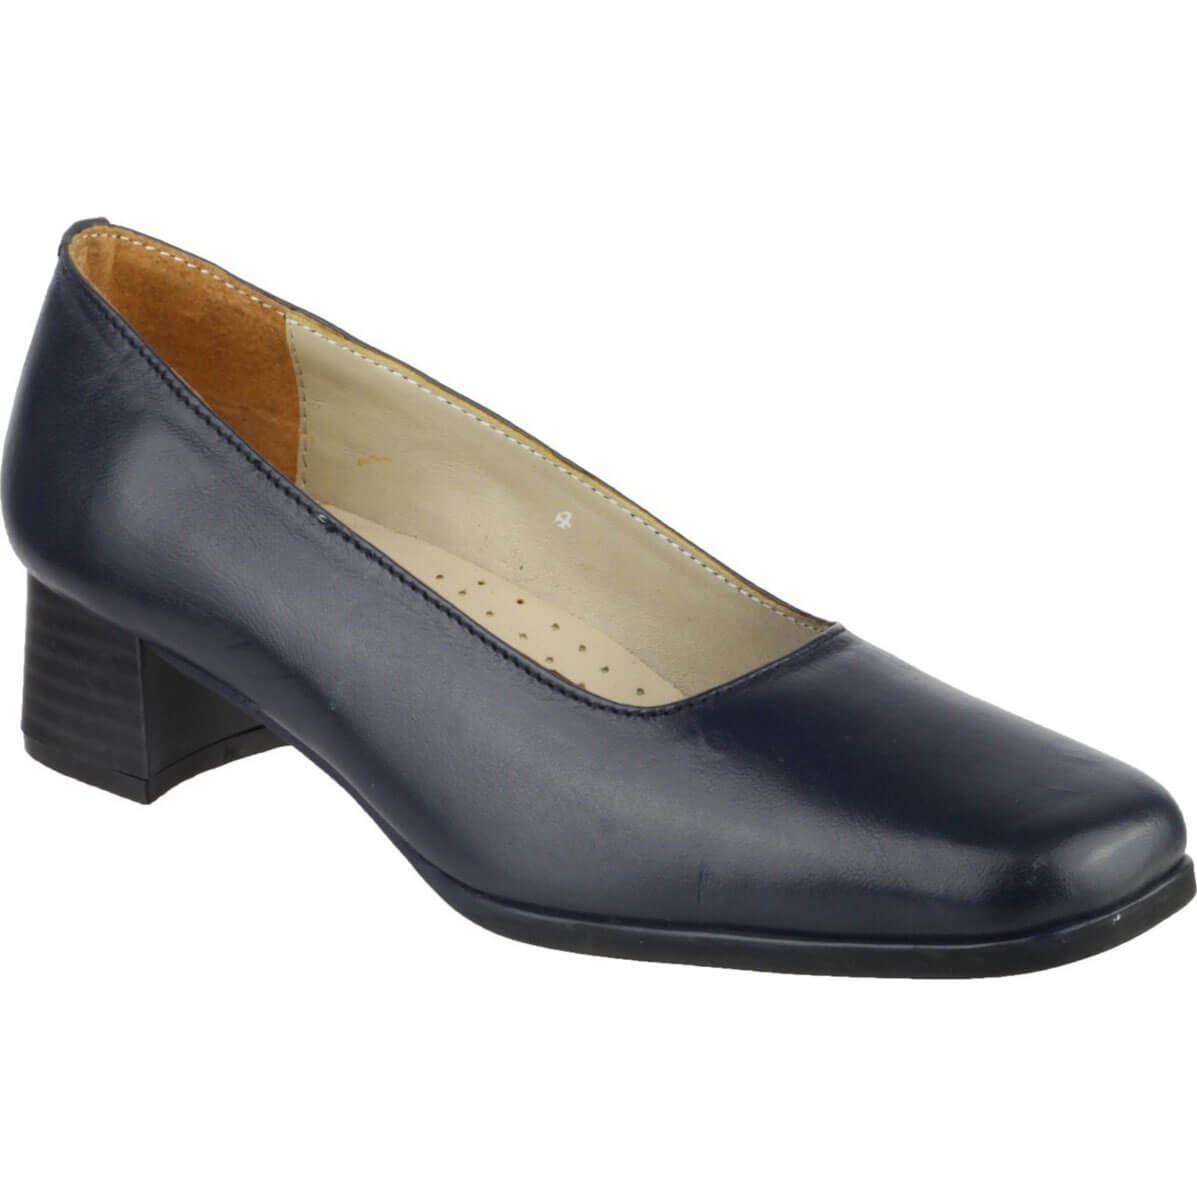 Image of Amblers Walford Ladies Shoes Leather Court Navy Size 3